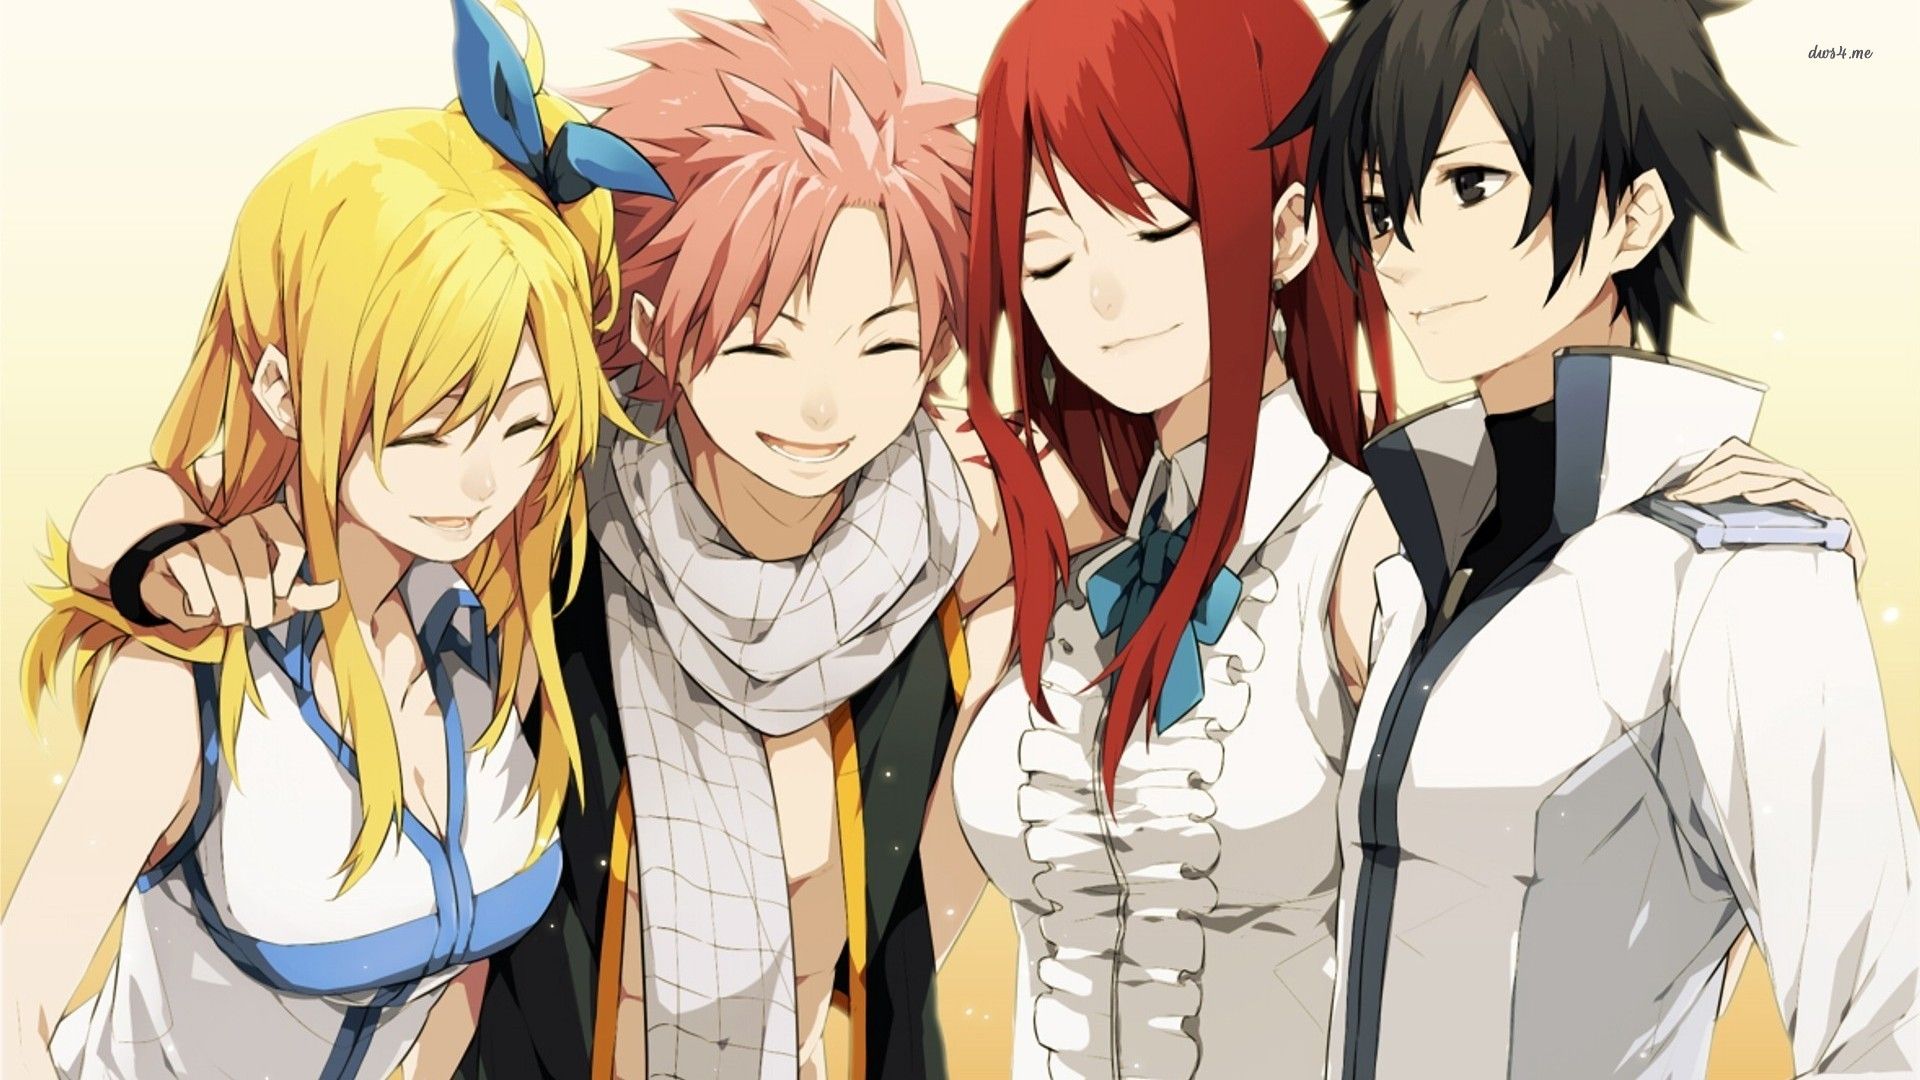 Fairy Tail wallpaper - Anime wallpapers - #15493